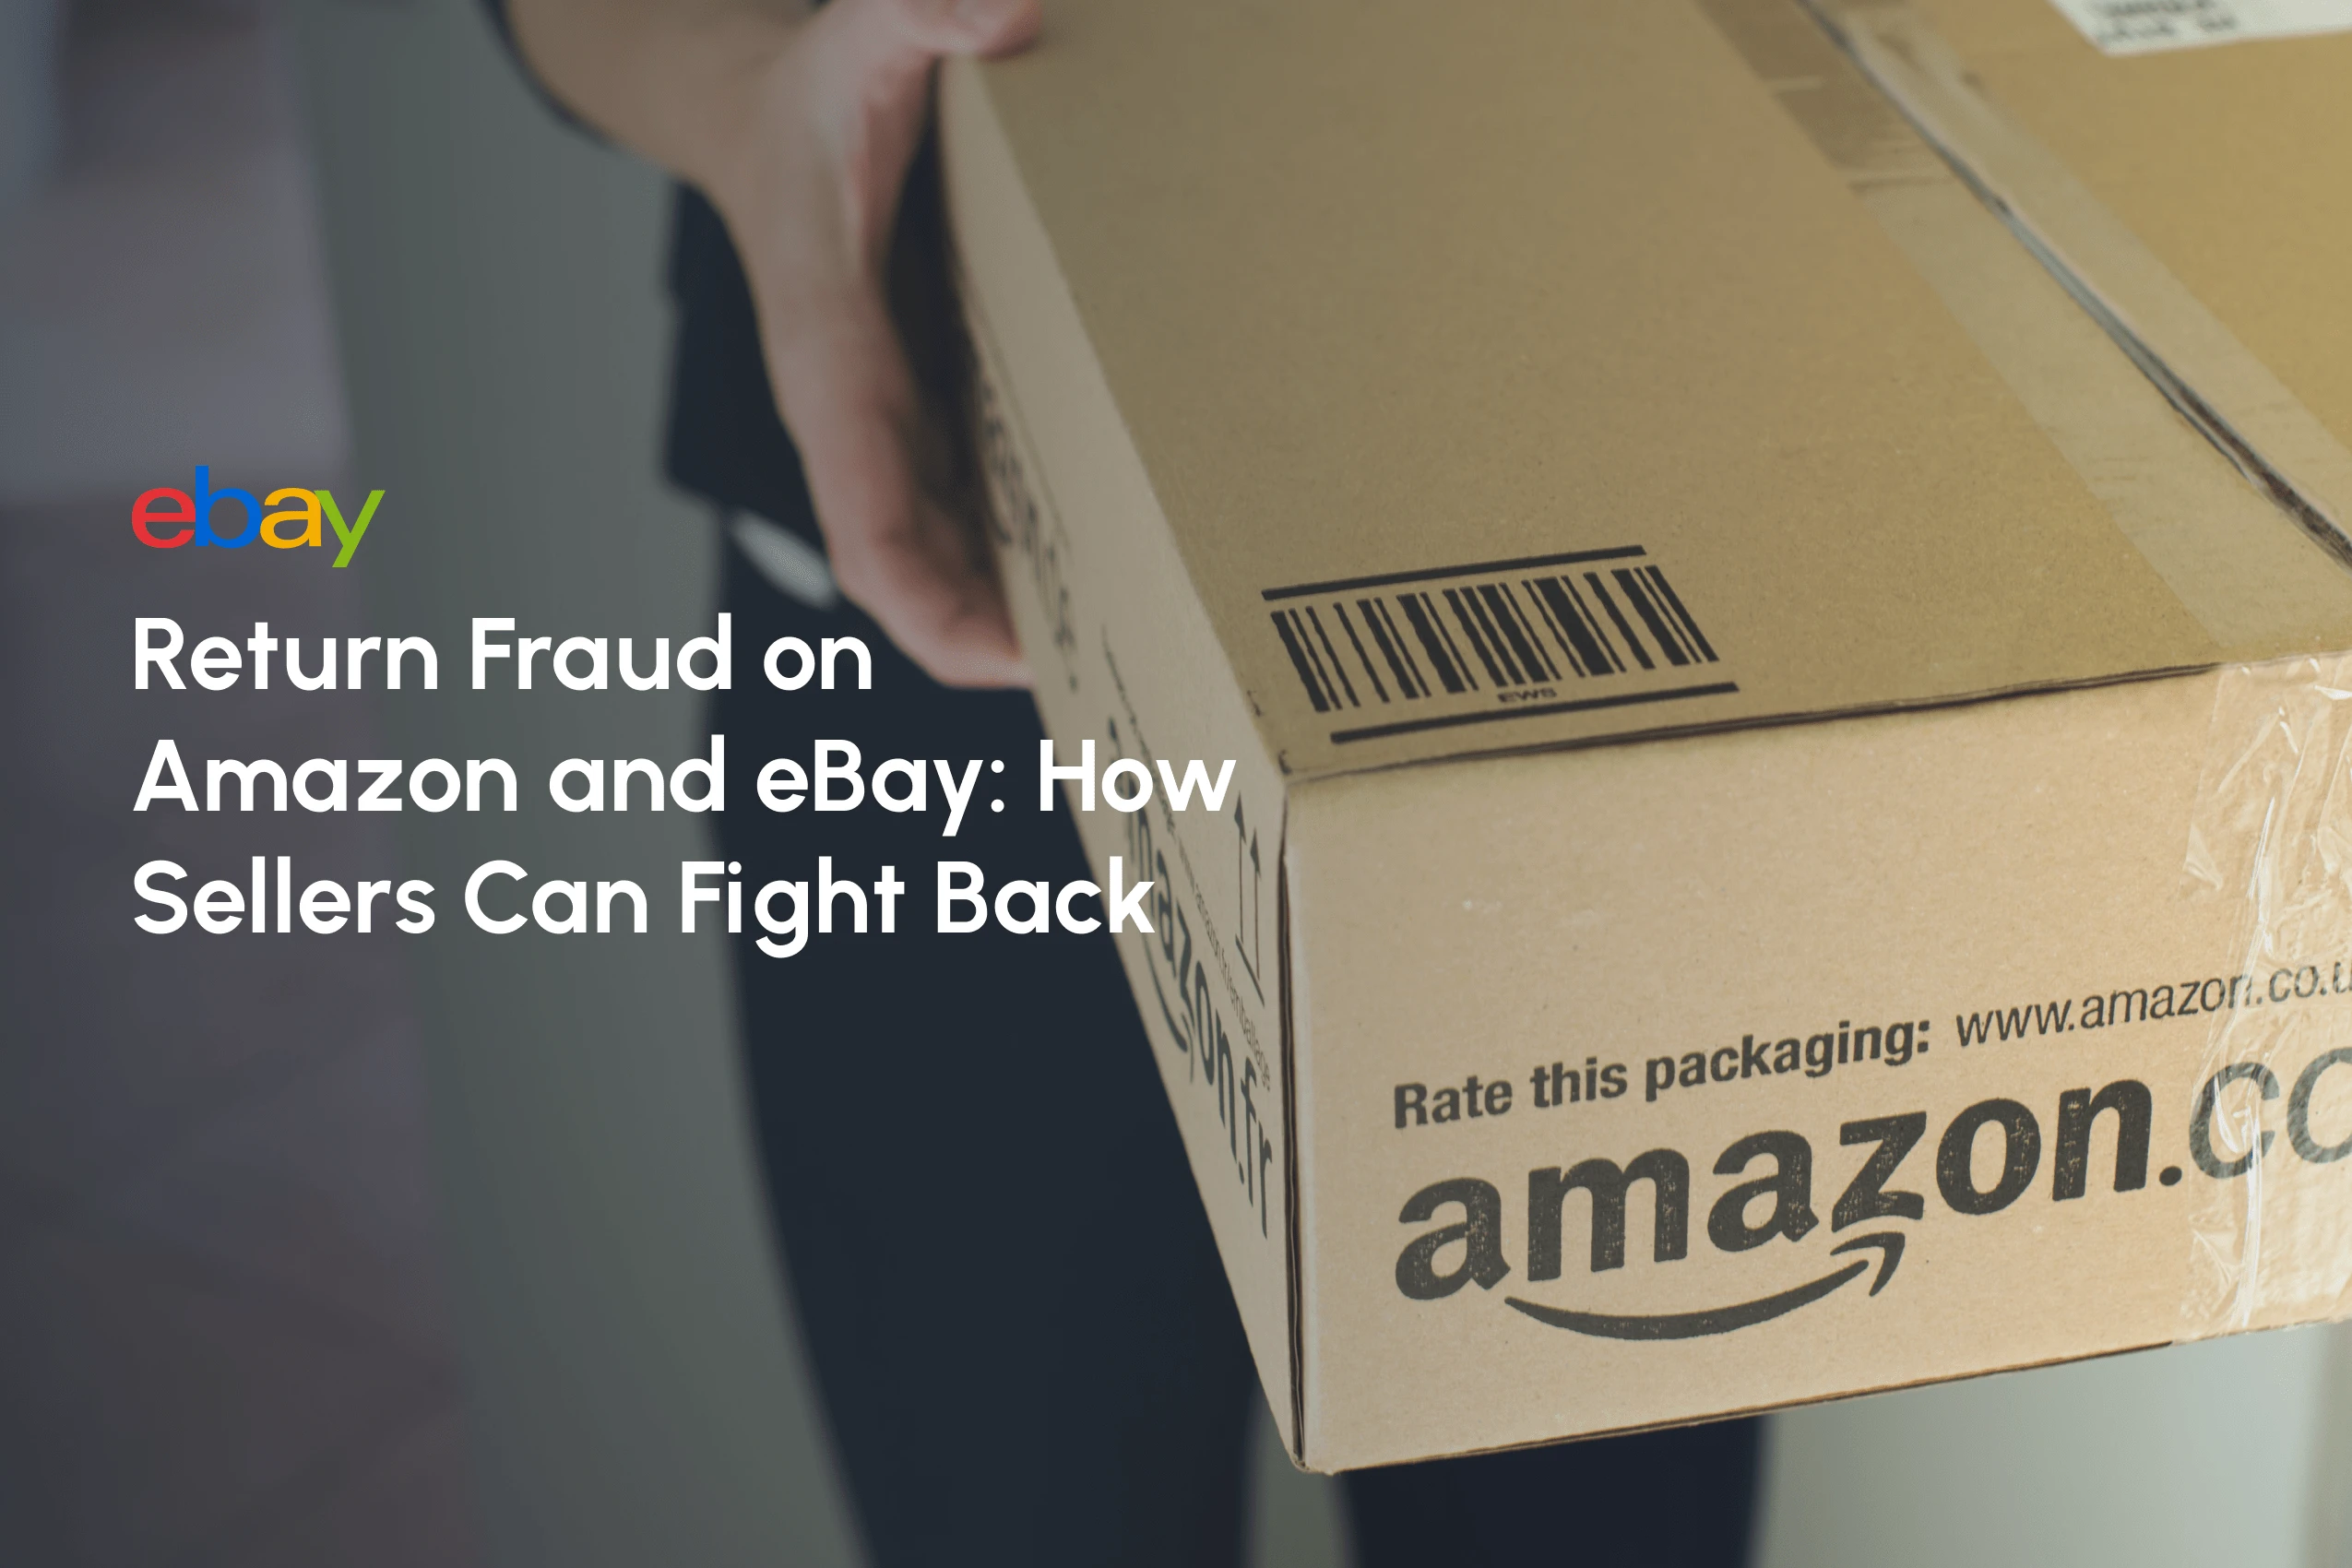 Return Fraud on Amazon and eBay - How Sellers Can Fight Back